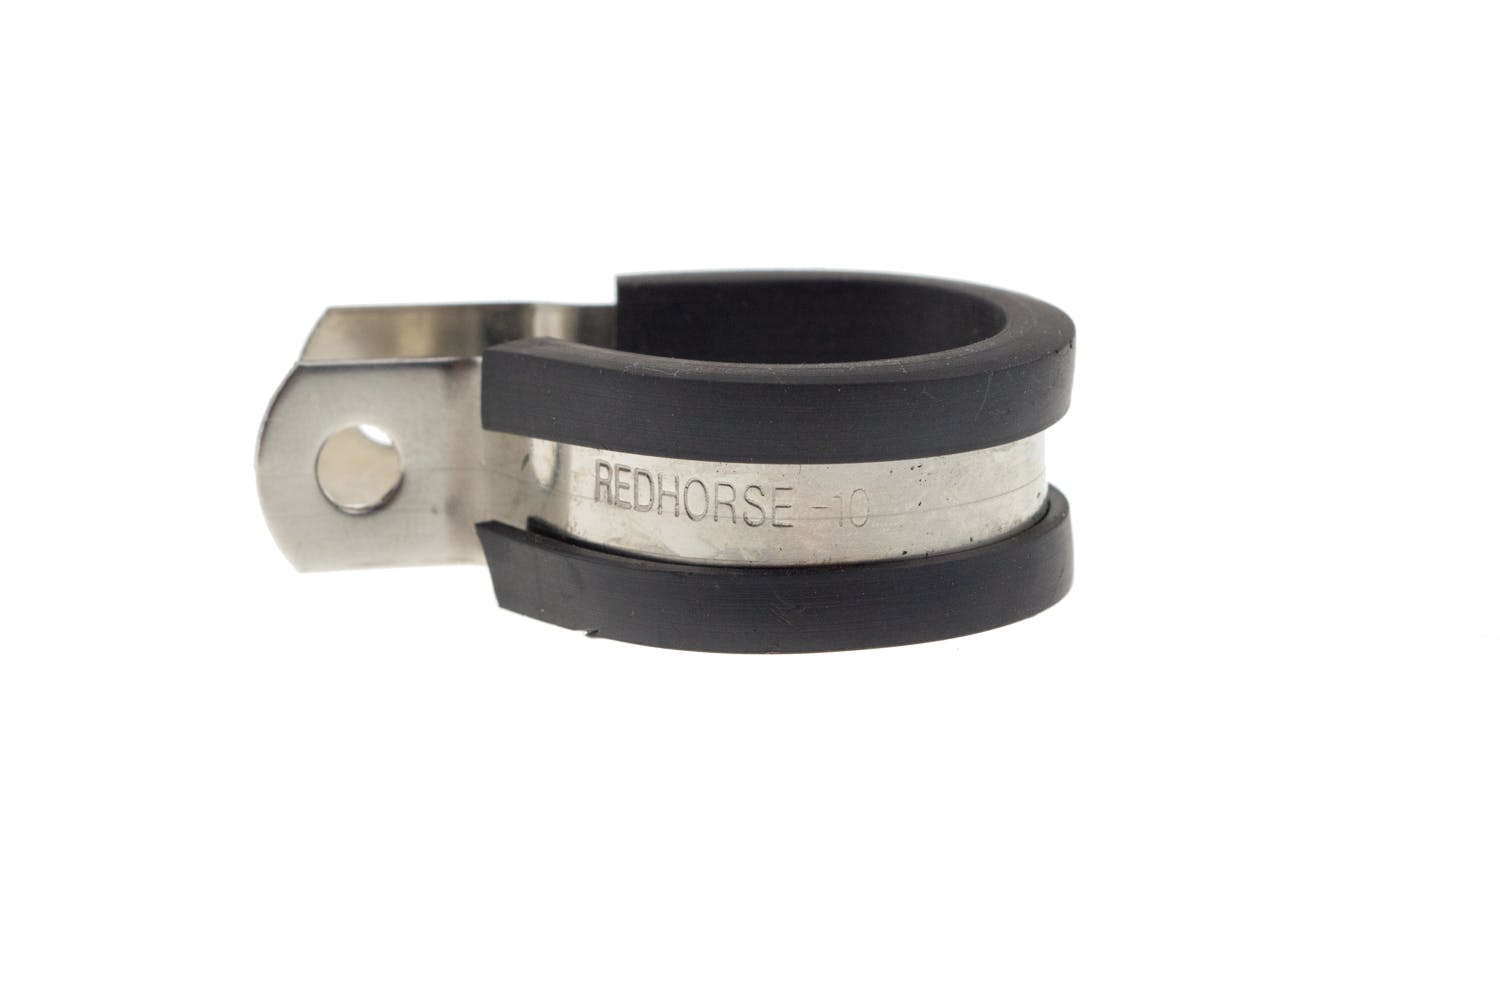 Redhorse Performance 220-10-2 -10 Cushioned Hose Clamp 10pcs/Package.